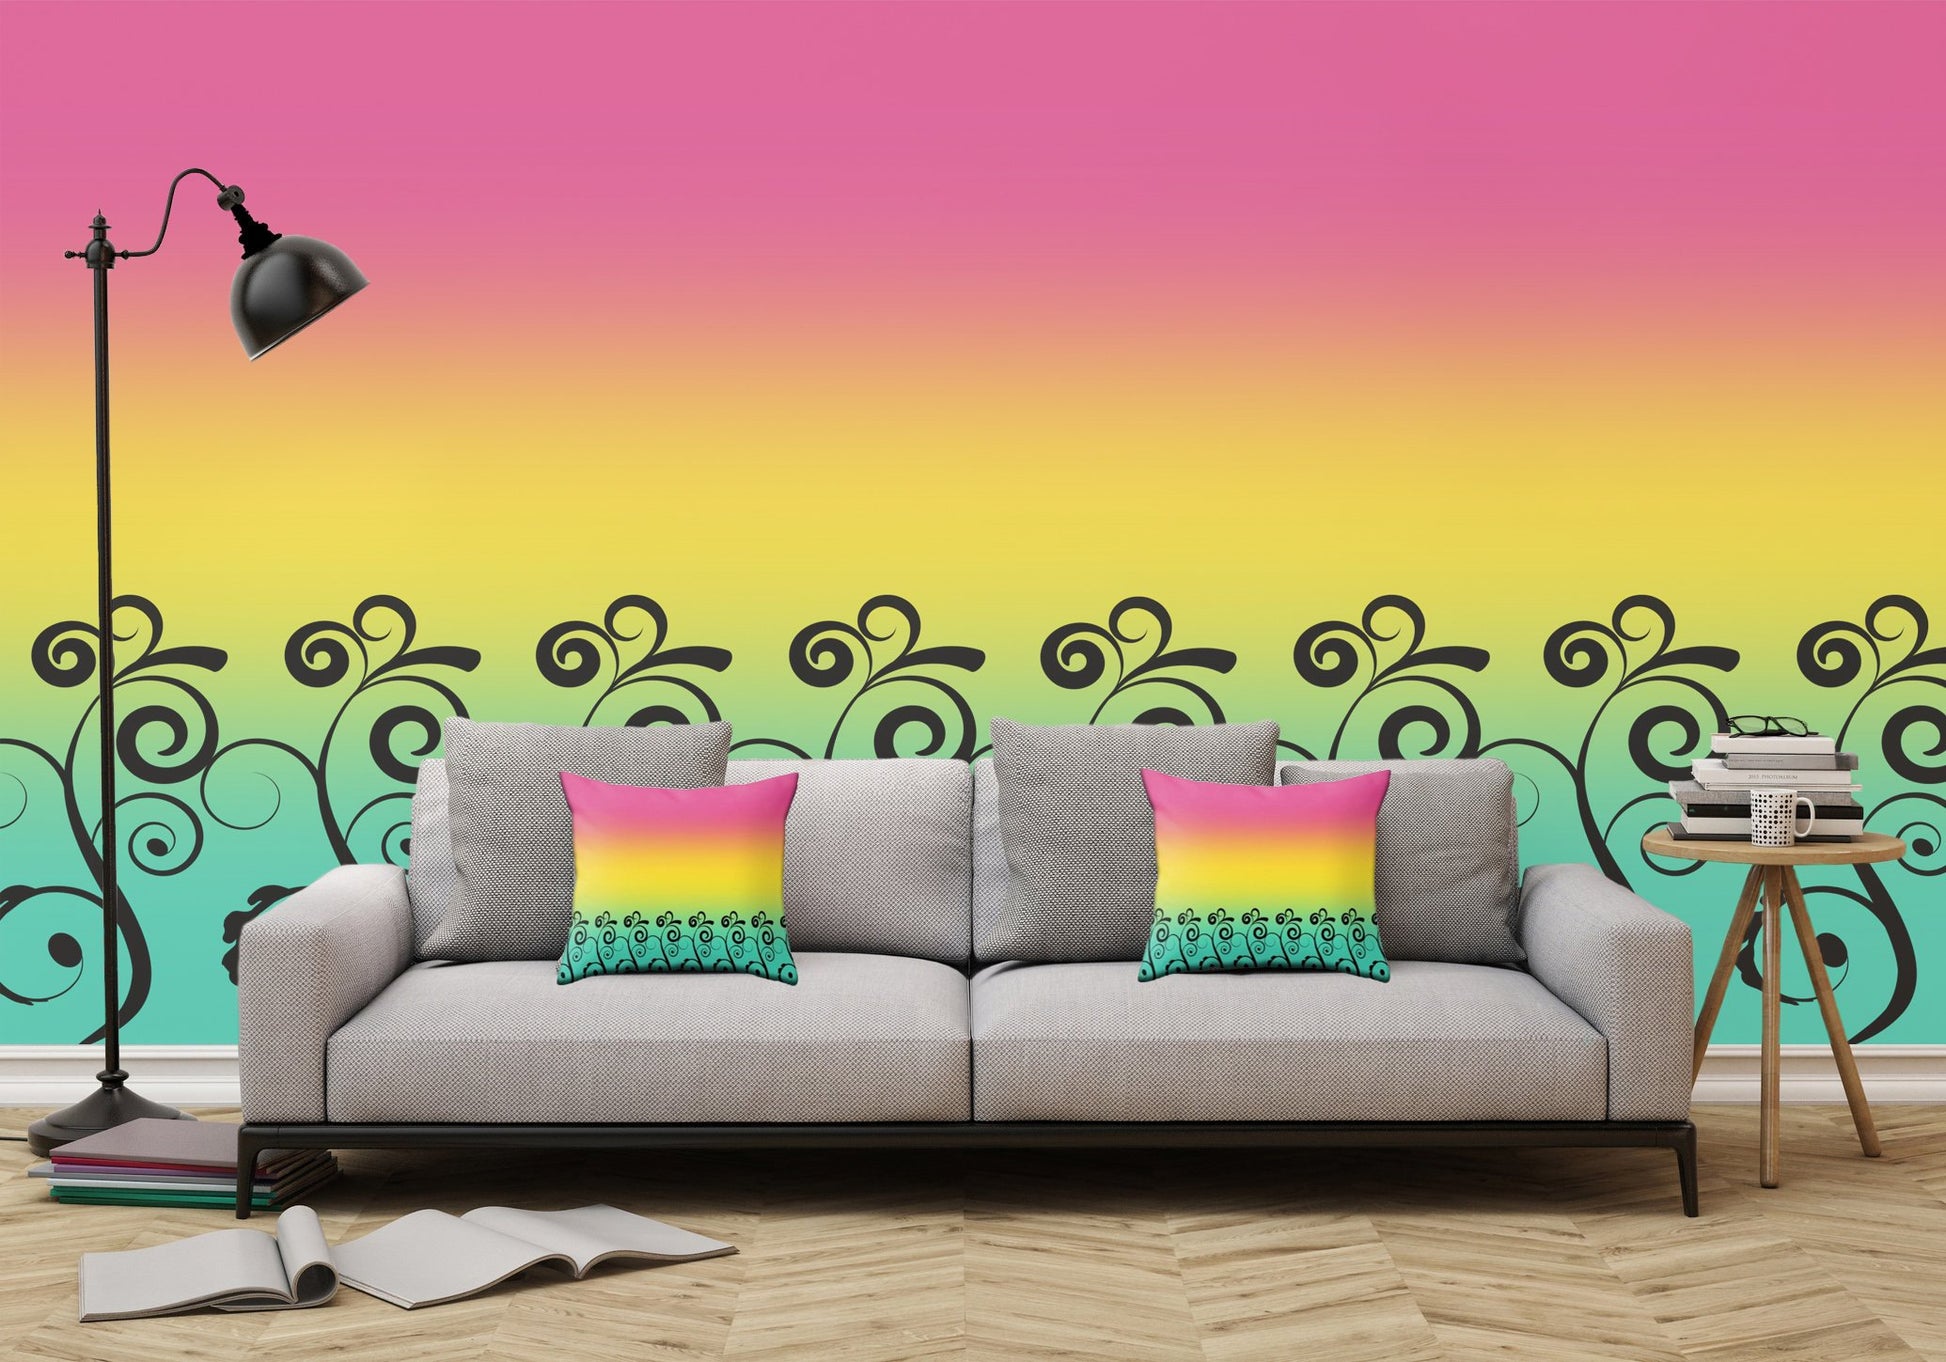 Misty Rainbow Swirl Wall Mural - Adhesive Wallpaper - Removable Wallpaper - Wall Sticker - Full Size Wall Mural  - PIPAFINEART